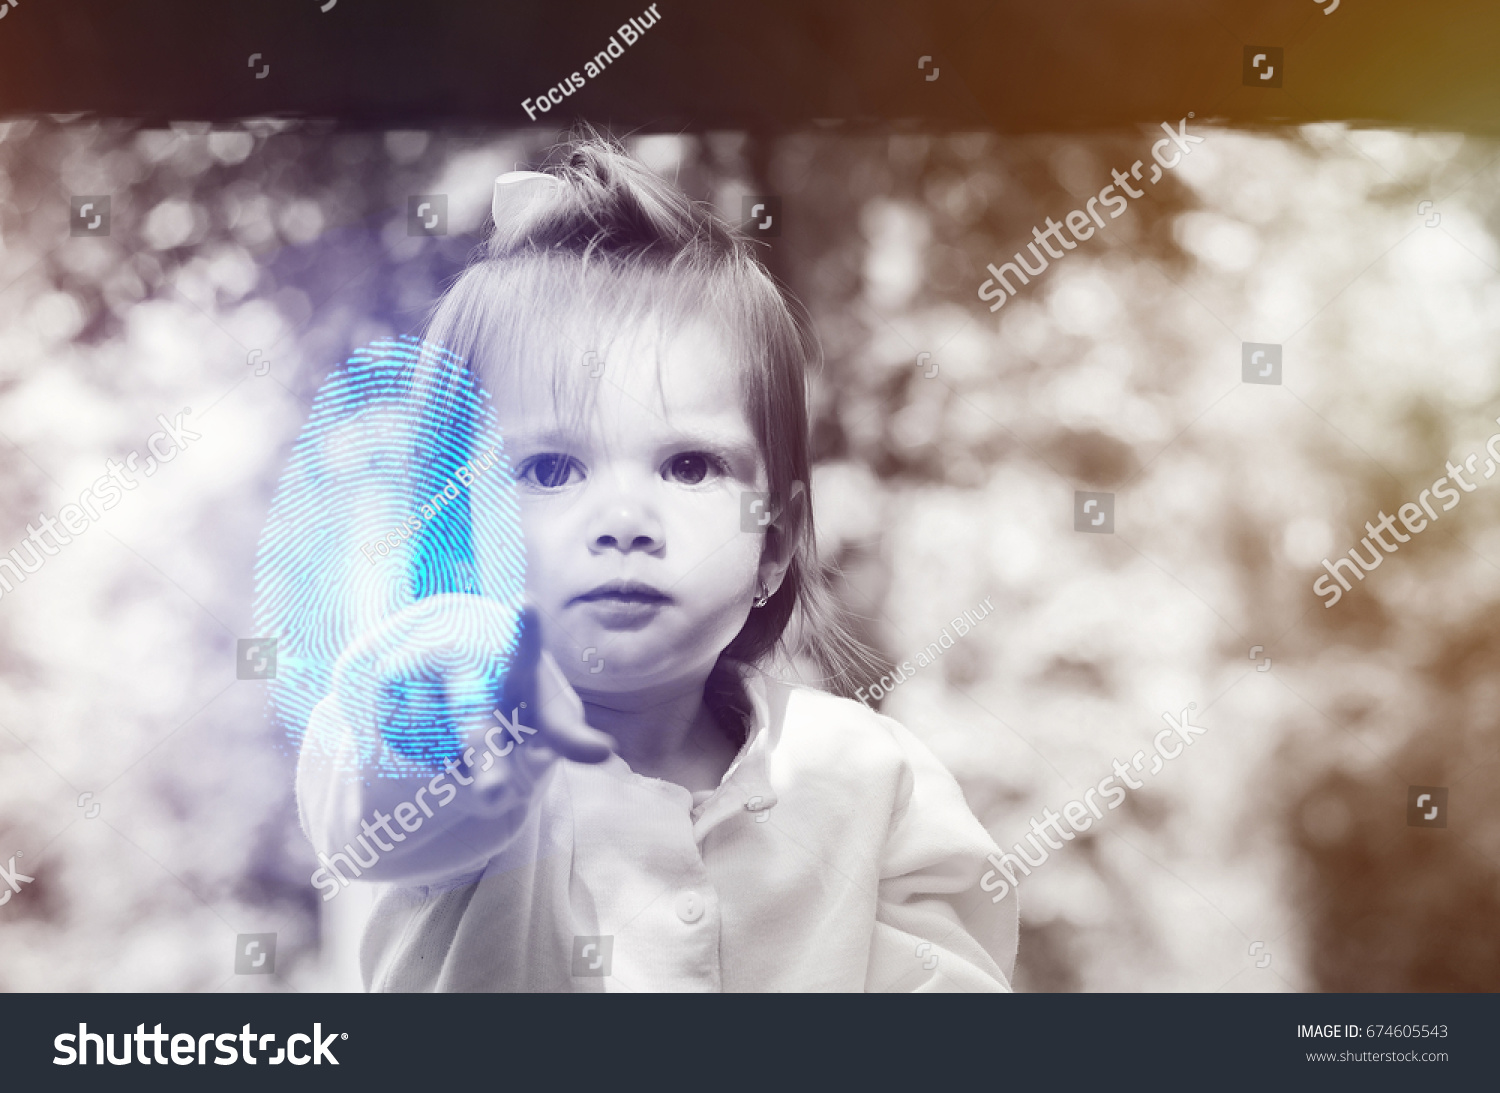 baby two years pointing a fingerprint at the camera, digital and copy space #674605543